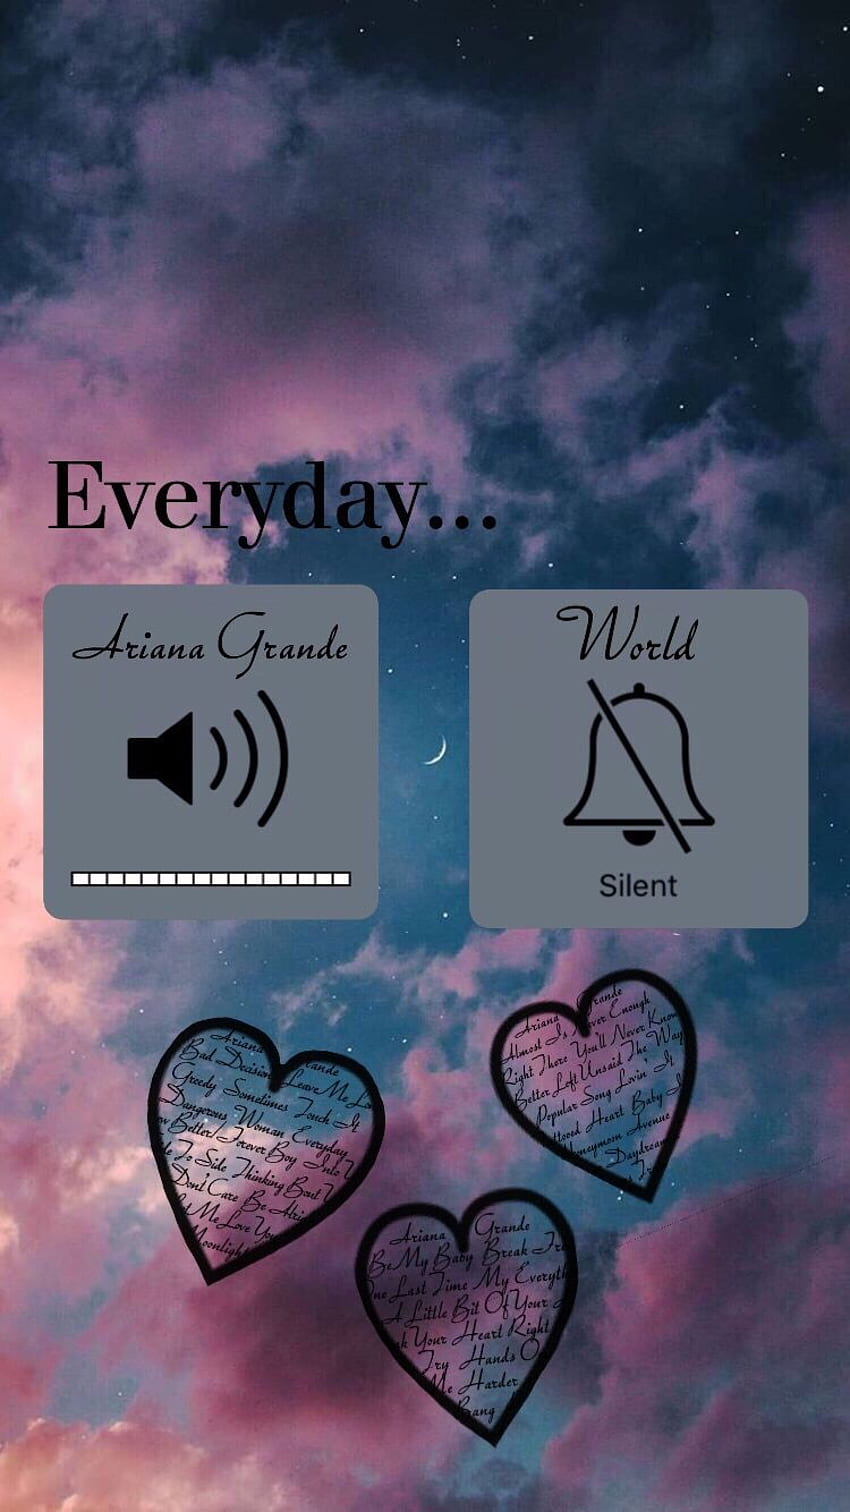 you are my everything wallpapers